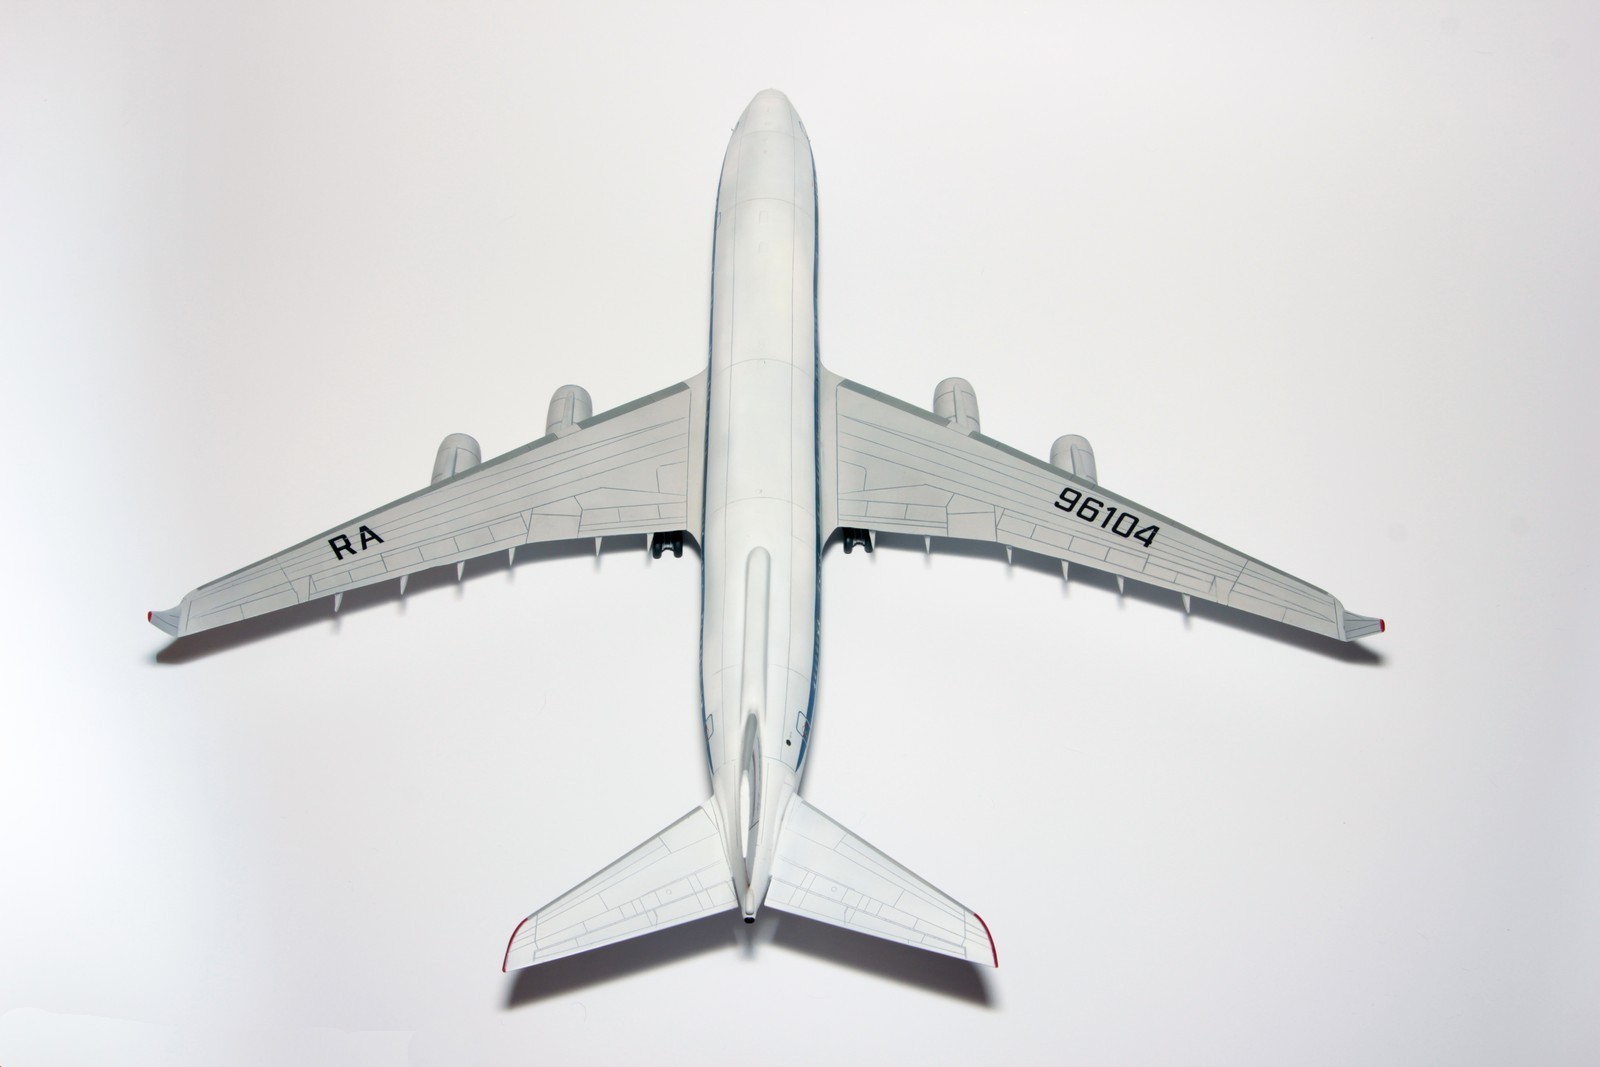 Model of the Il-96-400 aircraft in 1/144 scale, RA-96104 VPU FSB of Russia - My, Models, Airplane, IL-96, Star, Stand modeling, , Aviation, Longpost